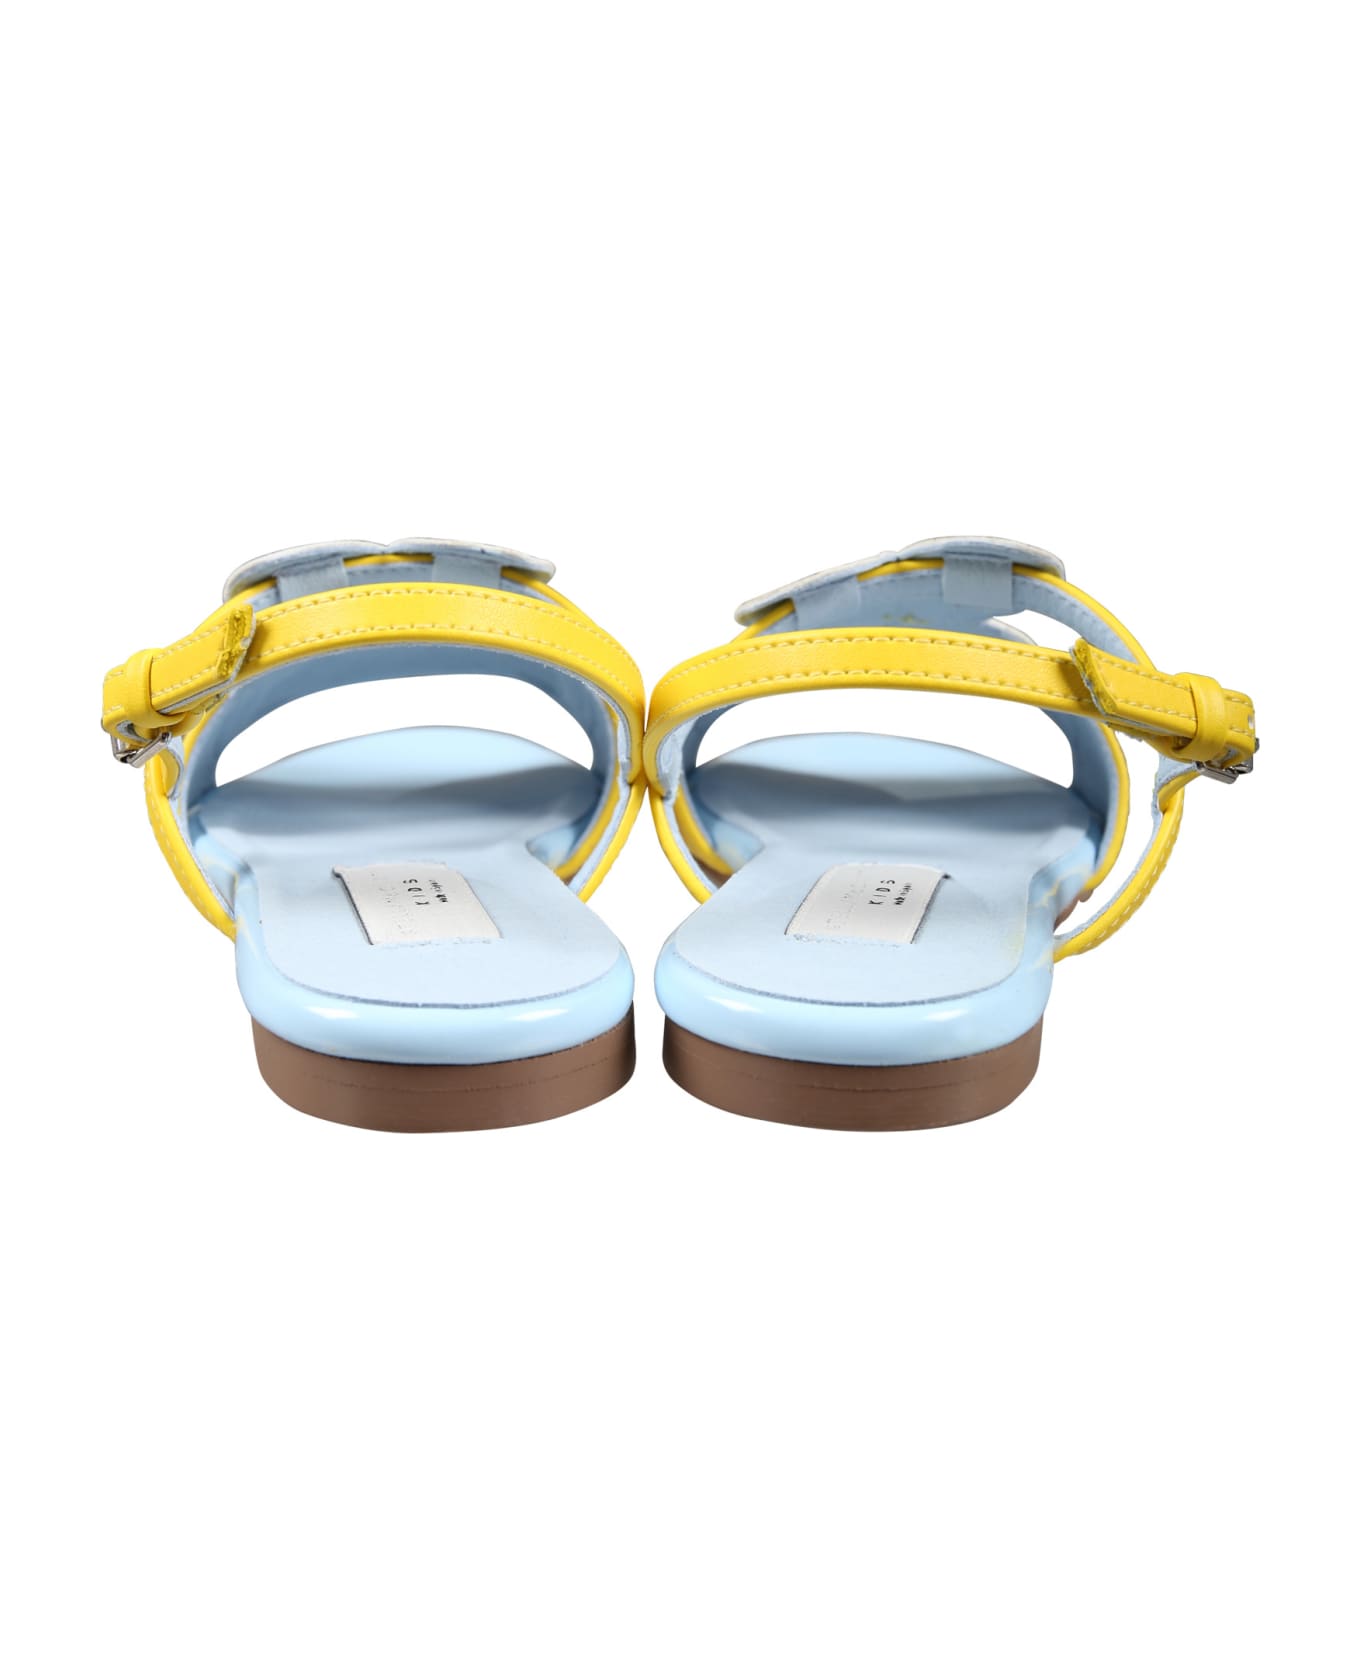 Stella McCartney Kids Yellow Sandals For Girl With Bees - Yellow